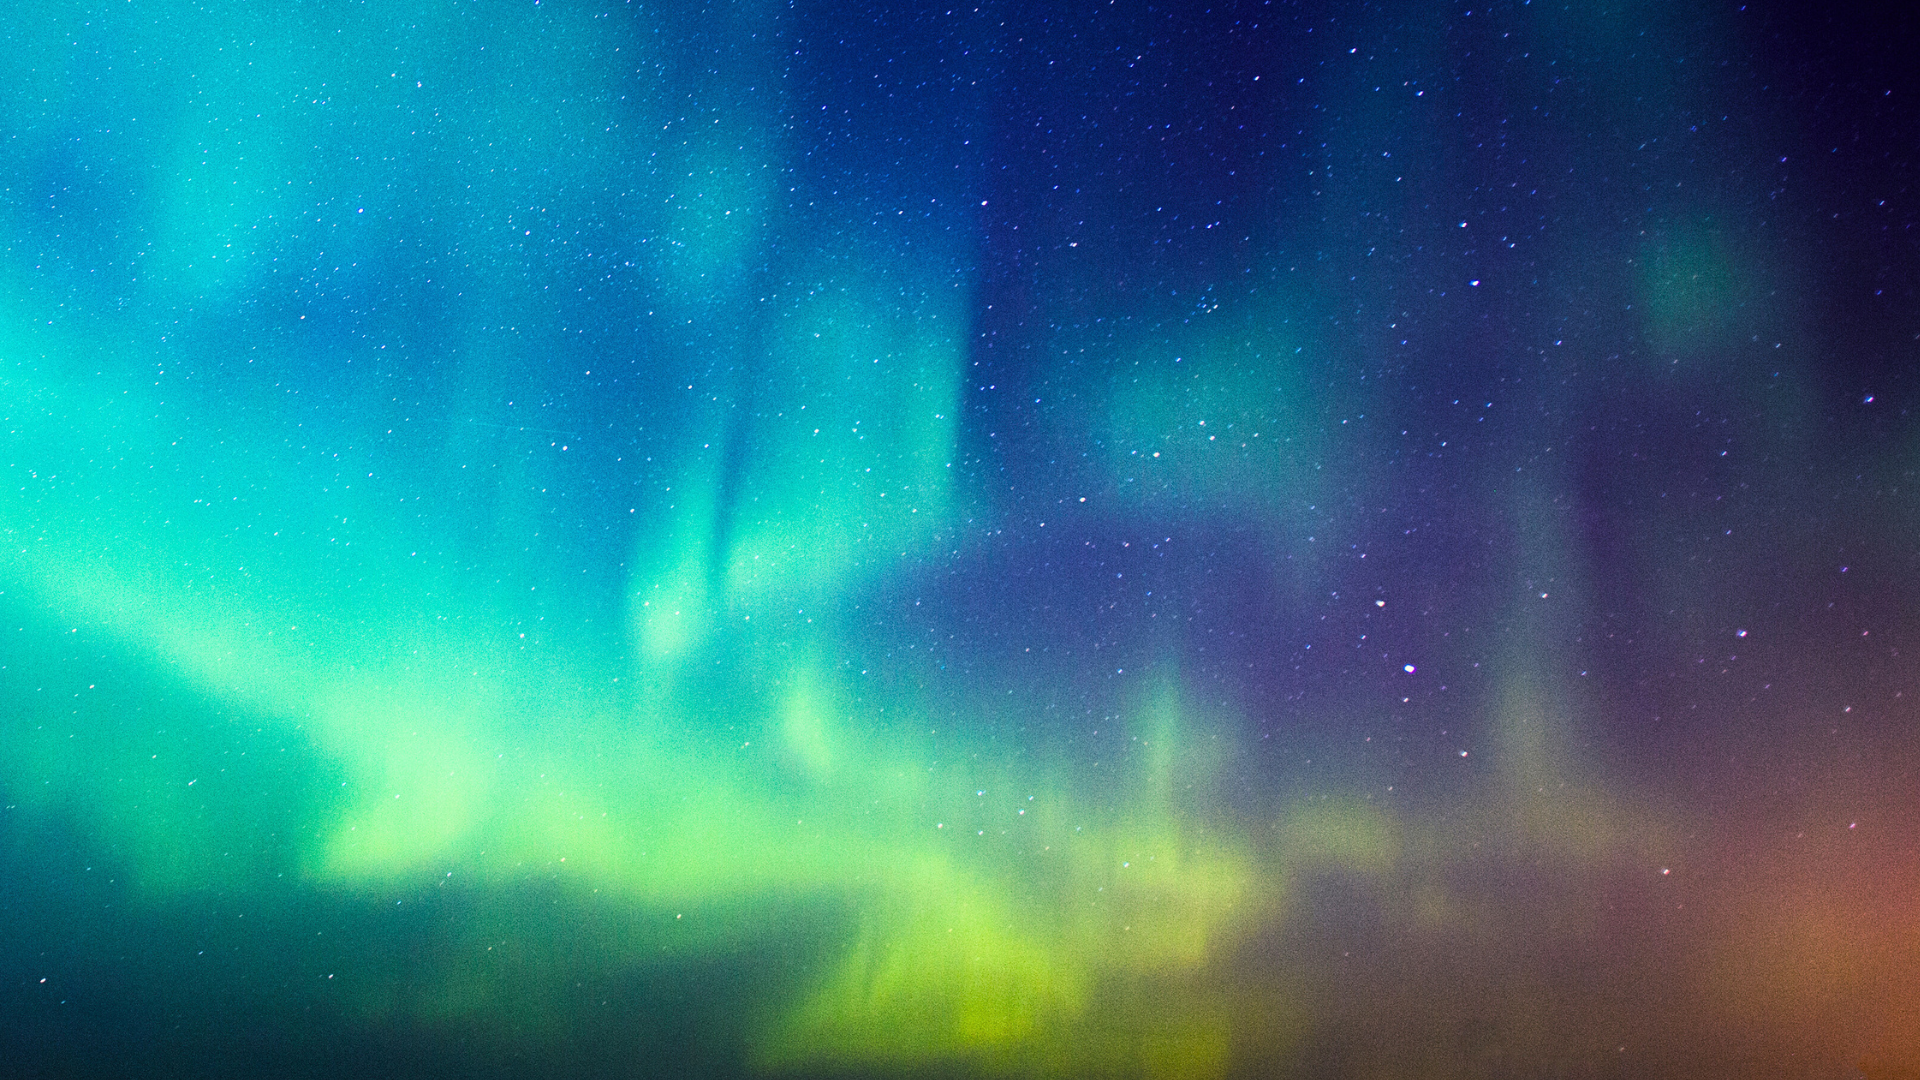 An image of the night sky illuminated by the northern lights.